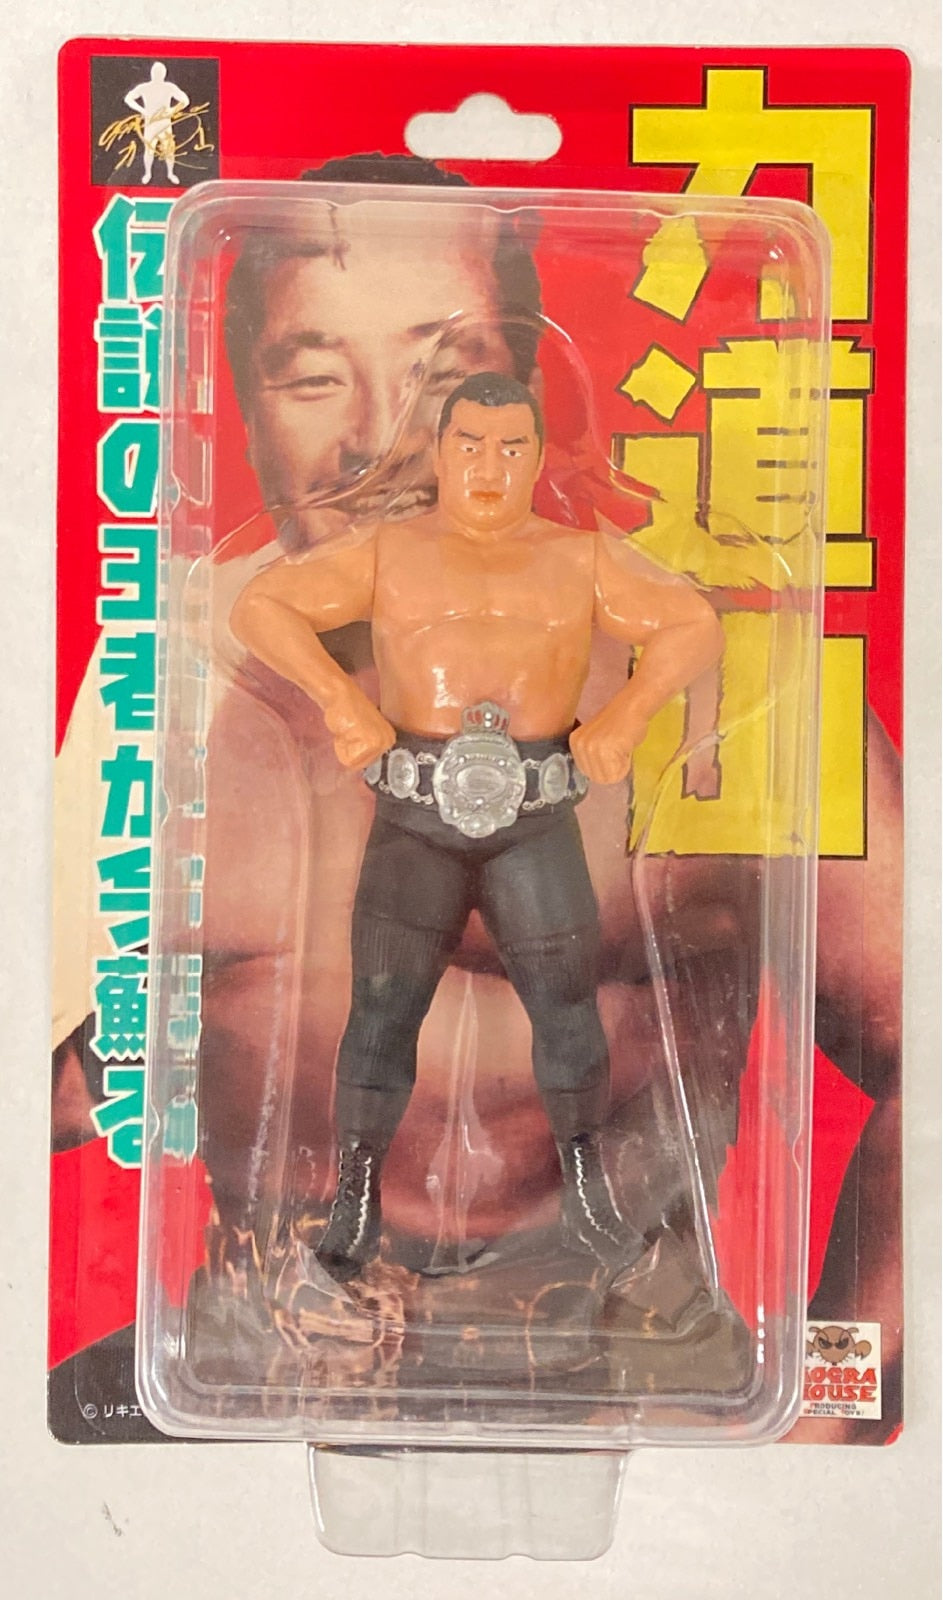 Mogura House Deluxe Rikidozan [In Intimidating Pose & With Small Championship]